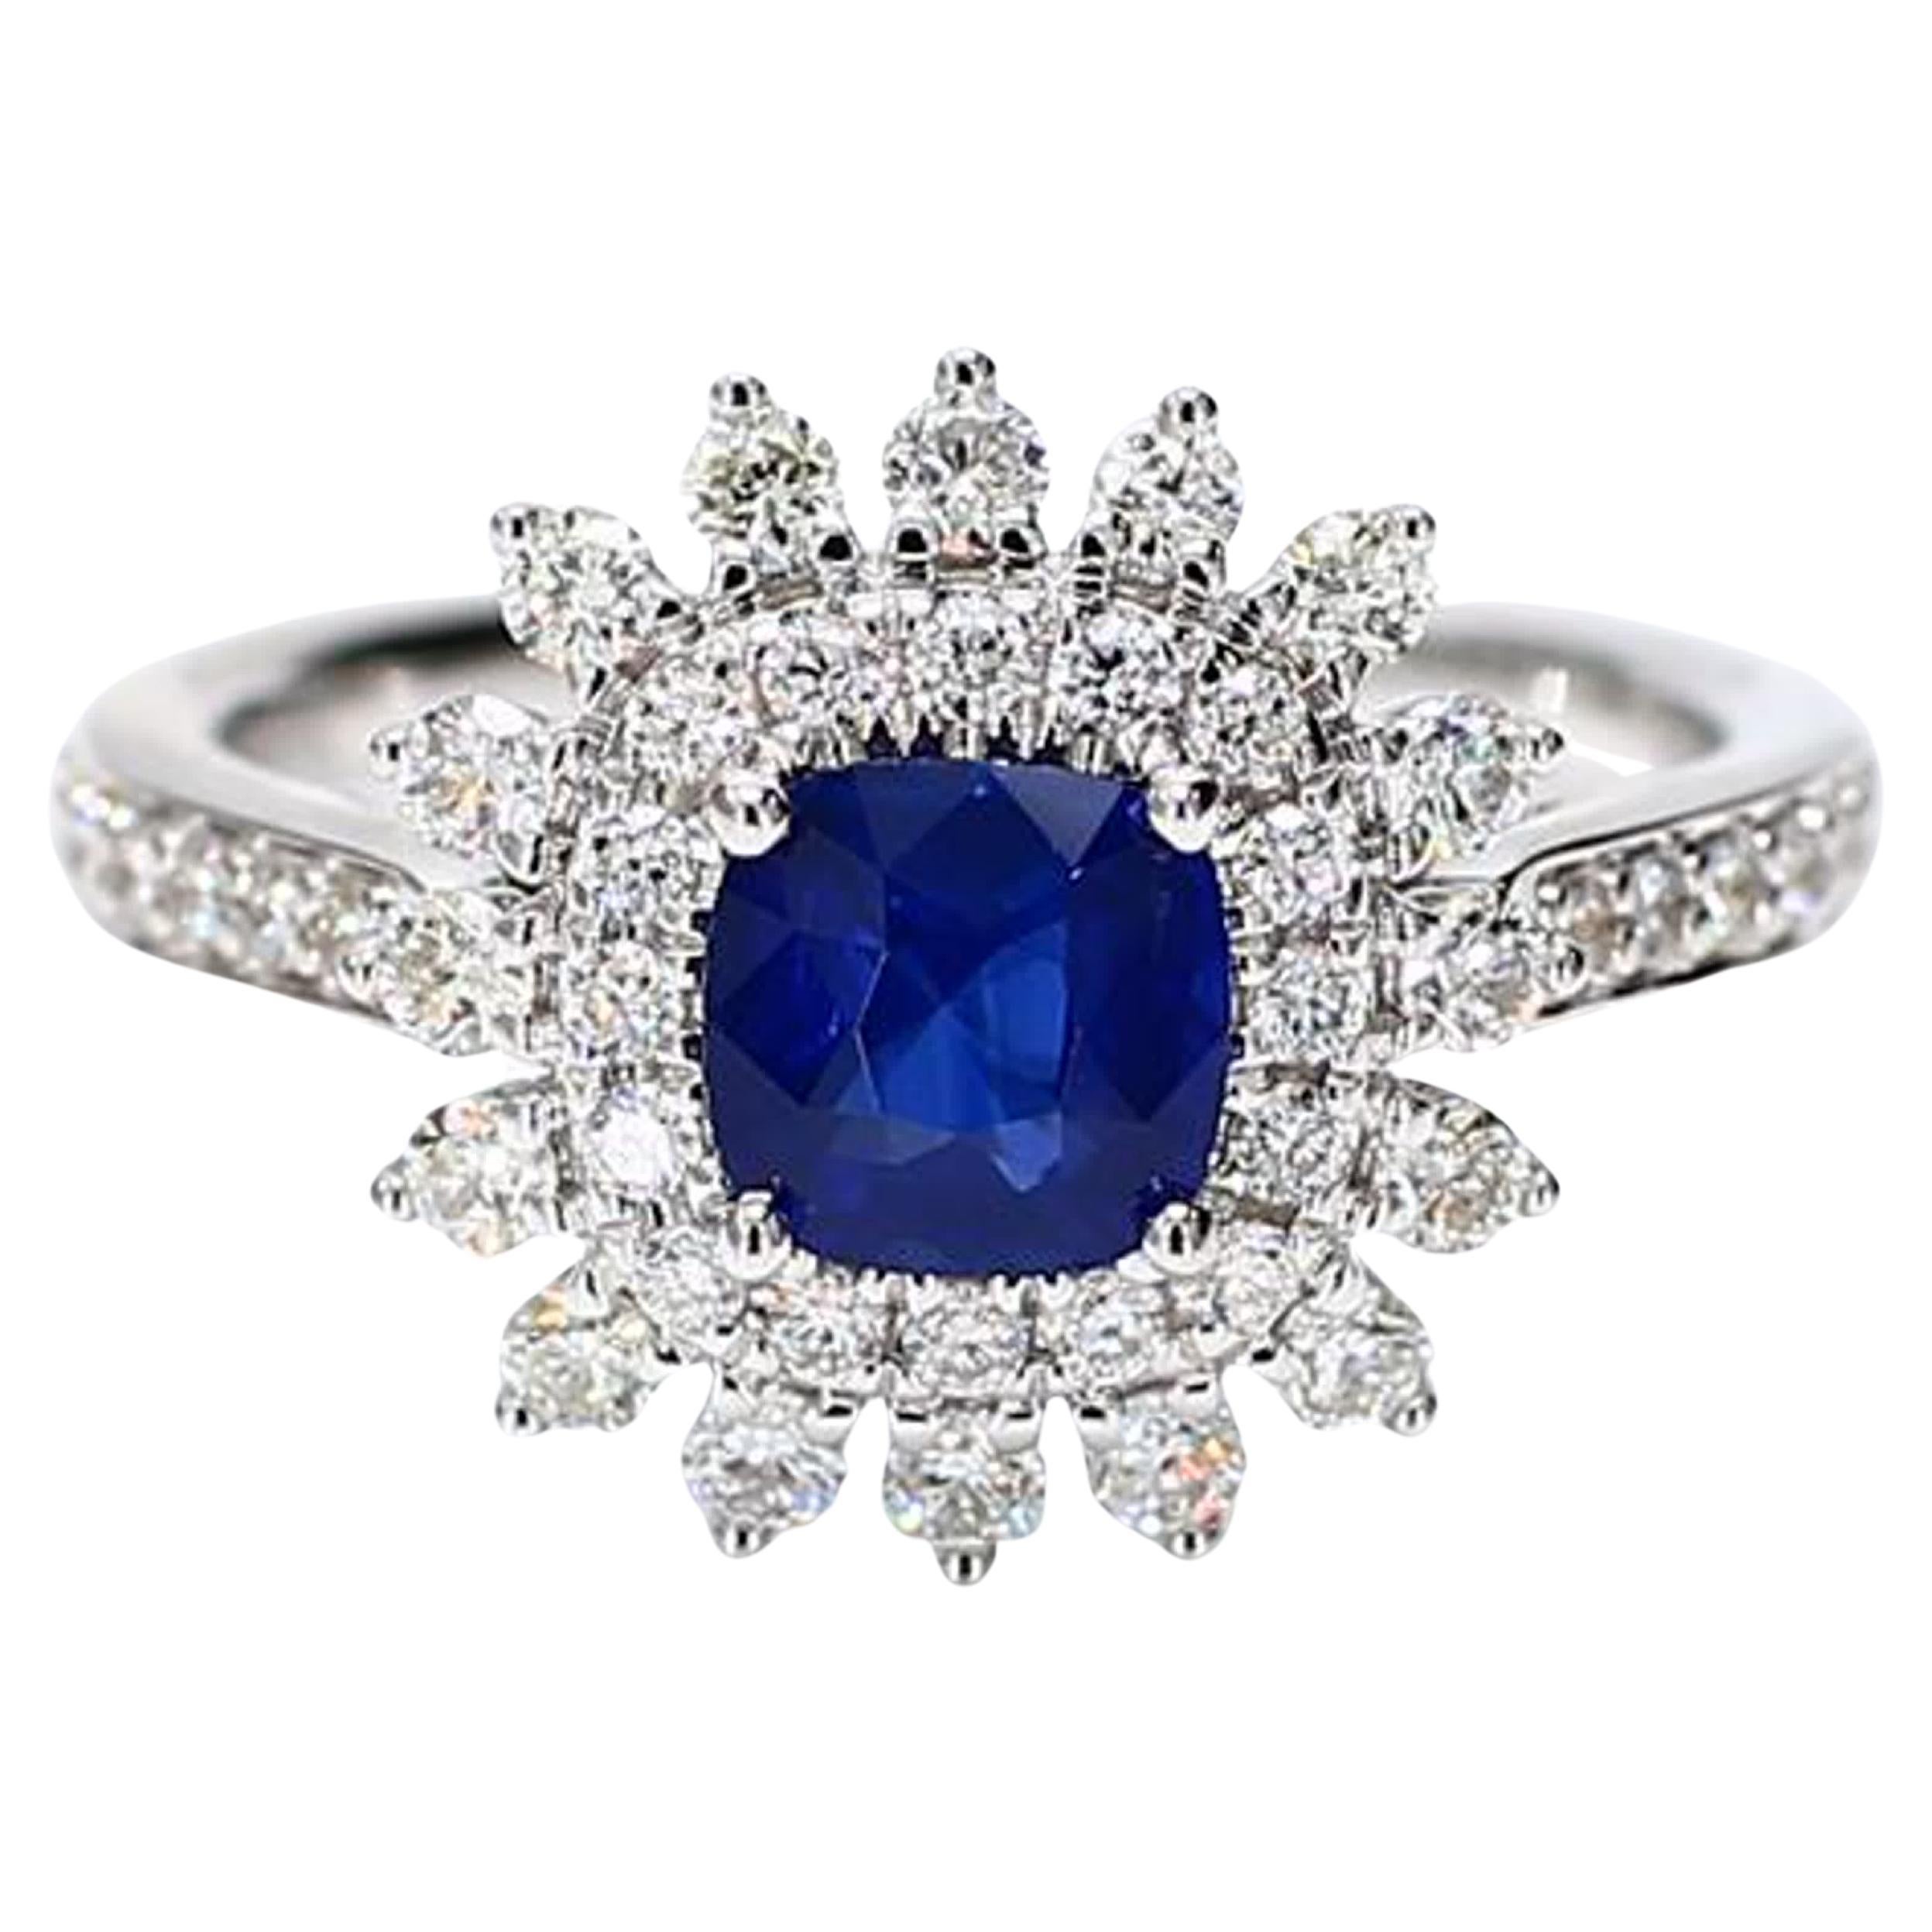 Sapphire Ring | Jewelry - Natural Ring S925 Sterling Silver Blue Ladies  Fashion - Aliexpress